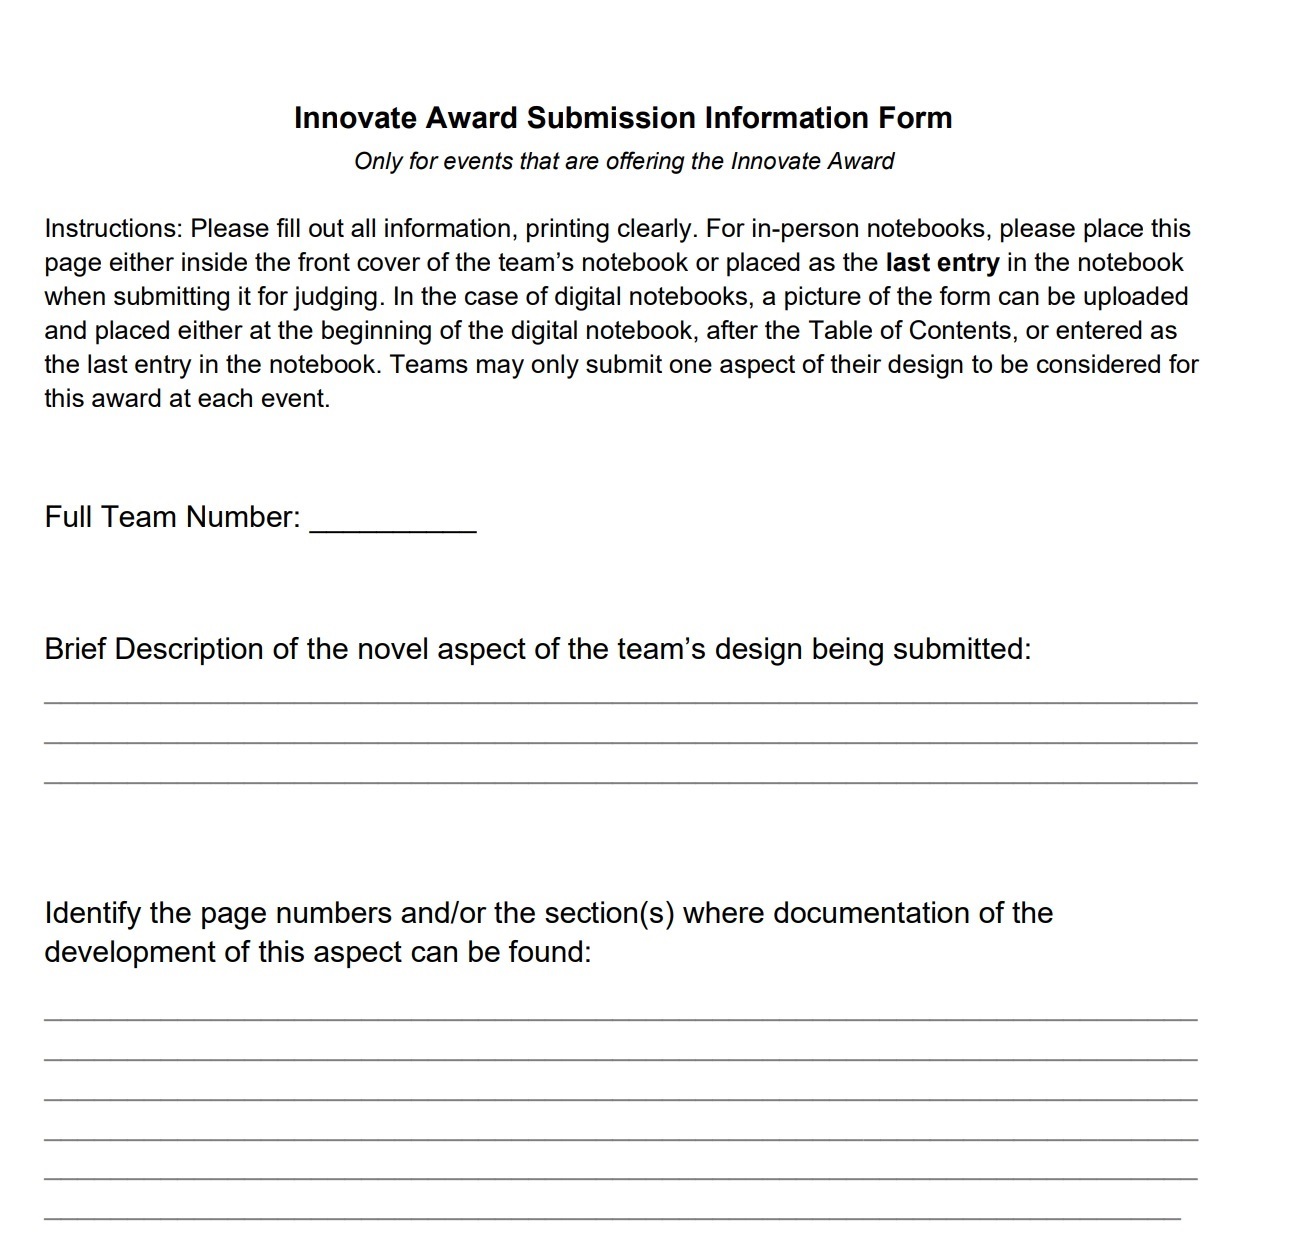 8 Innovate Award Submission Form.jpg